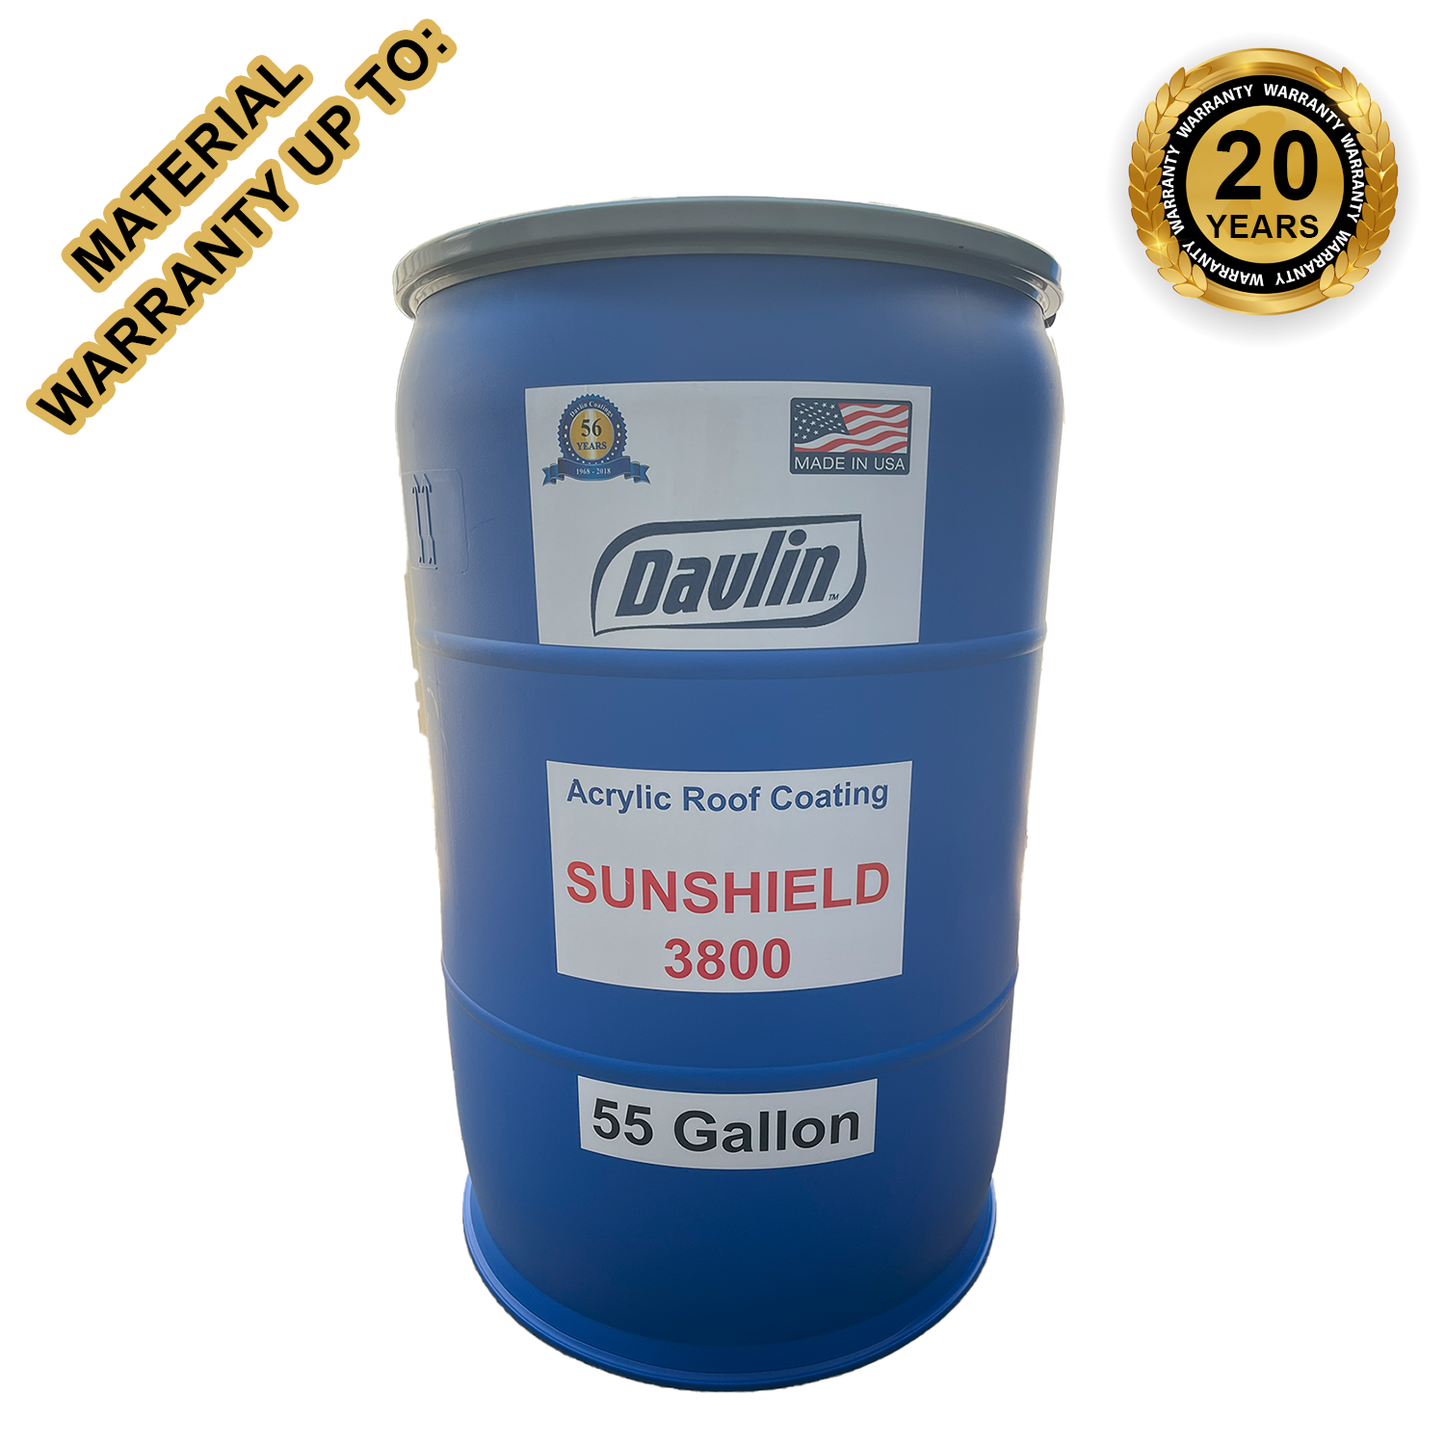 Acrylic Roof Coating SunShield 3800 - 5 Gal - Free Shipping - Reflective Roof Coating/Paint - Custom Color - Free Sample